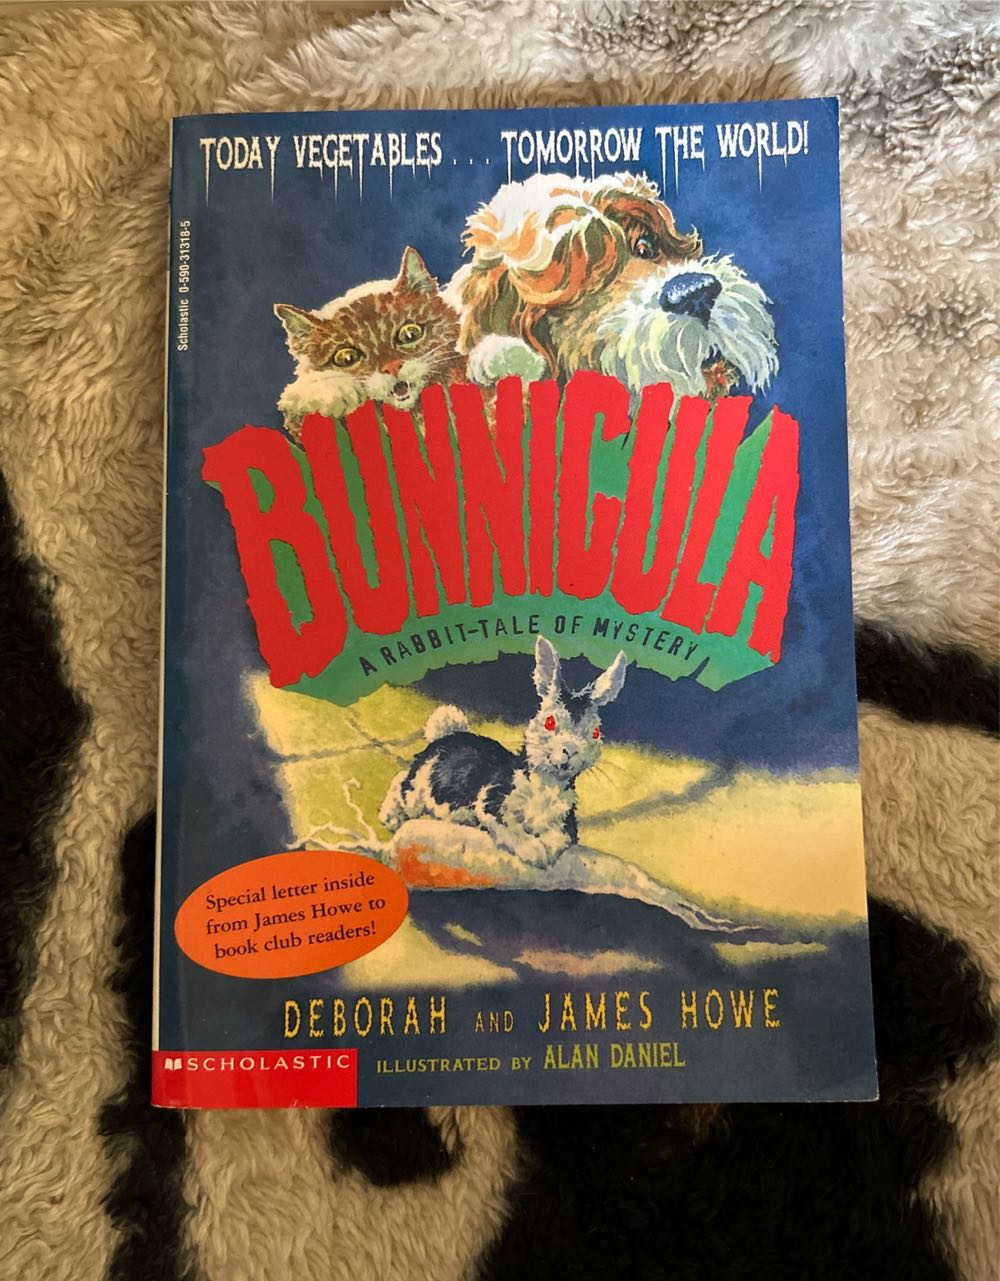 Bunnicula A Rabbit-Tale of Mystery - James Howe (New York : Scholastic Press - Paperback) book collectible [Barcode 9780590313186] - Main Image 3